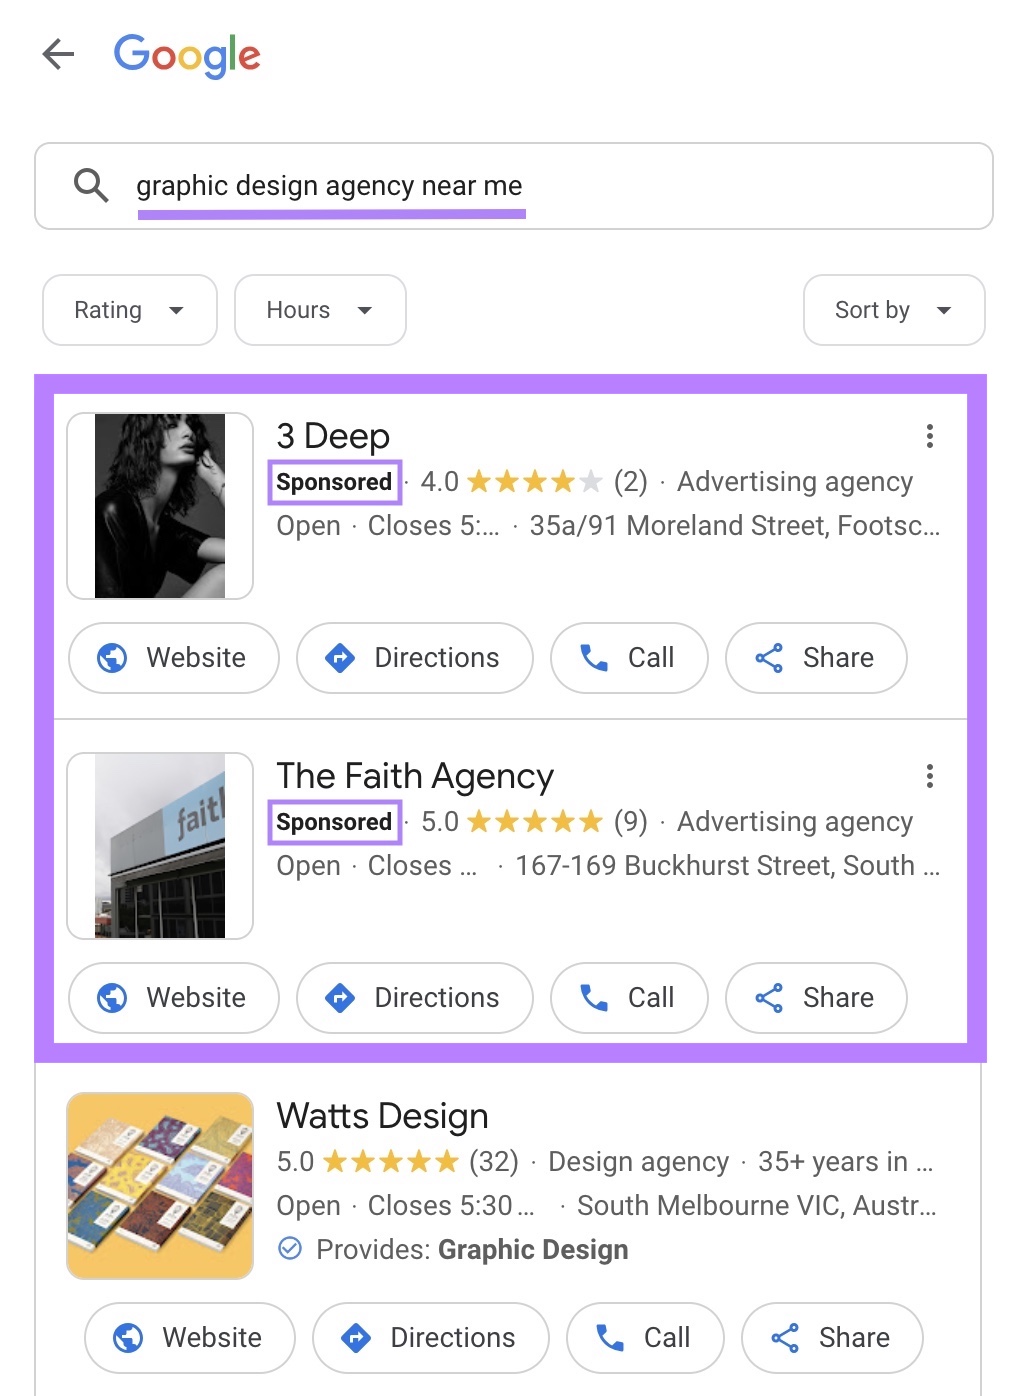 Google local ads appearing for “graphic design agency near me" query